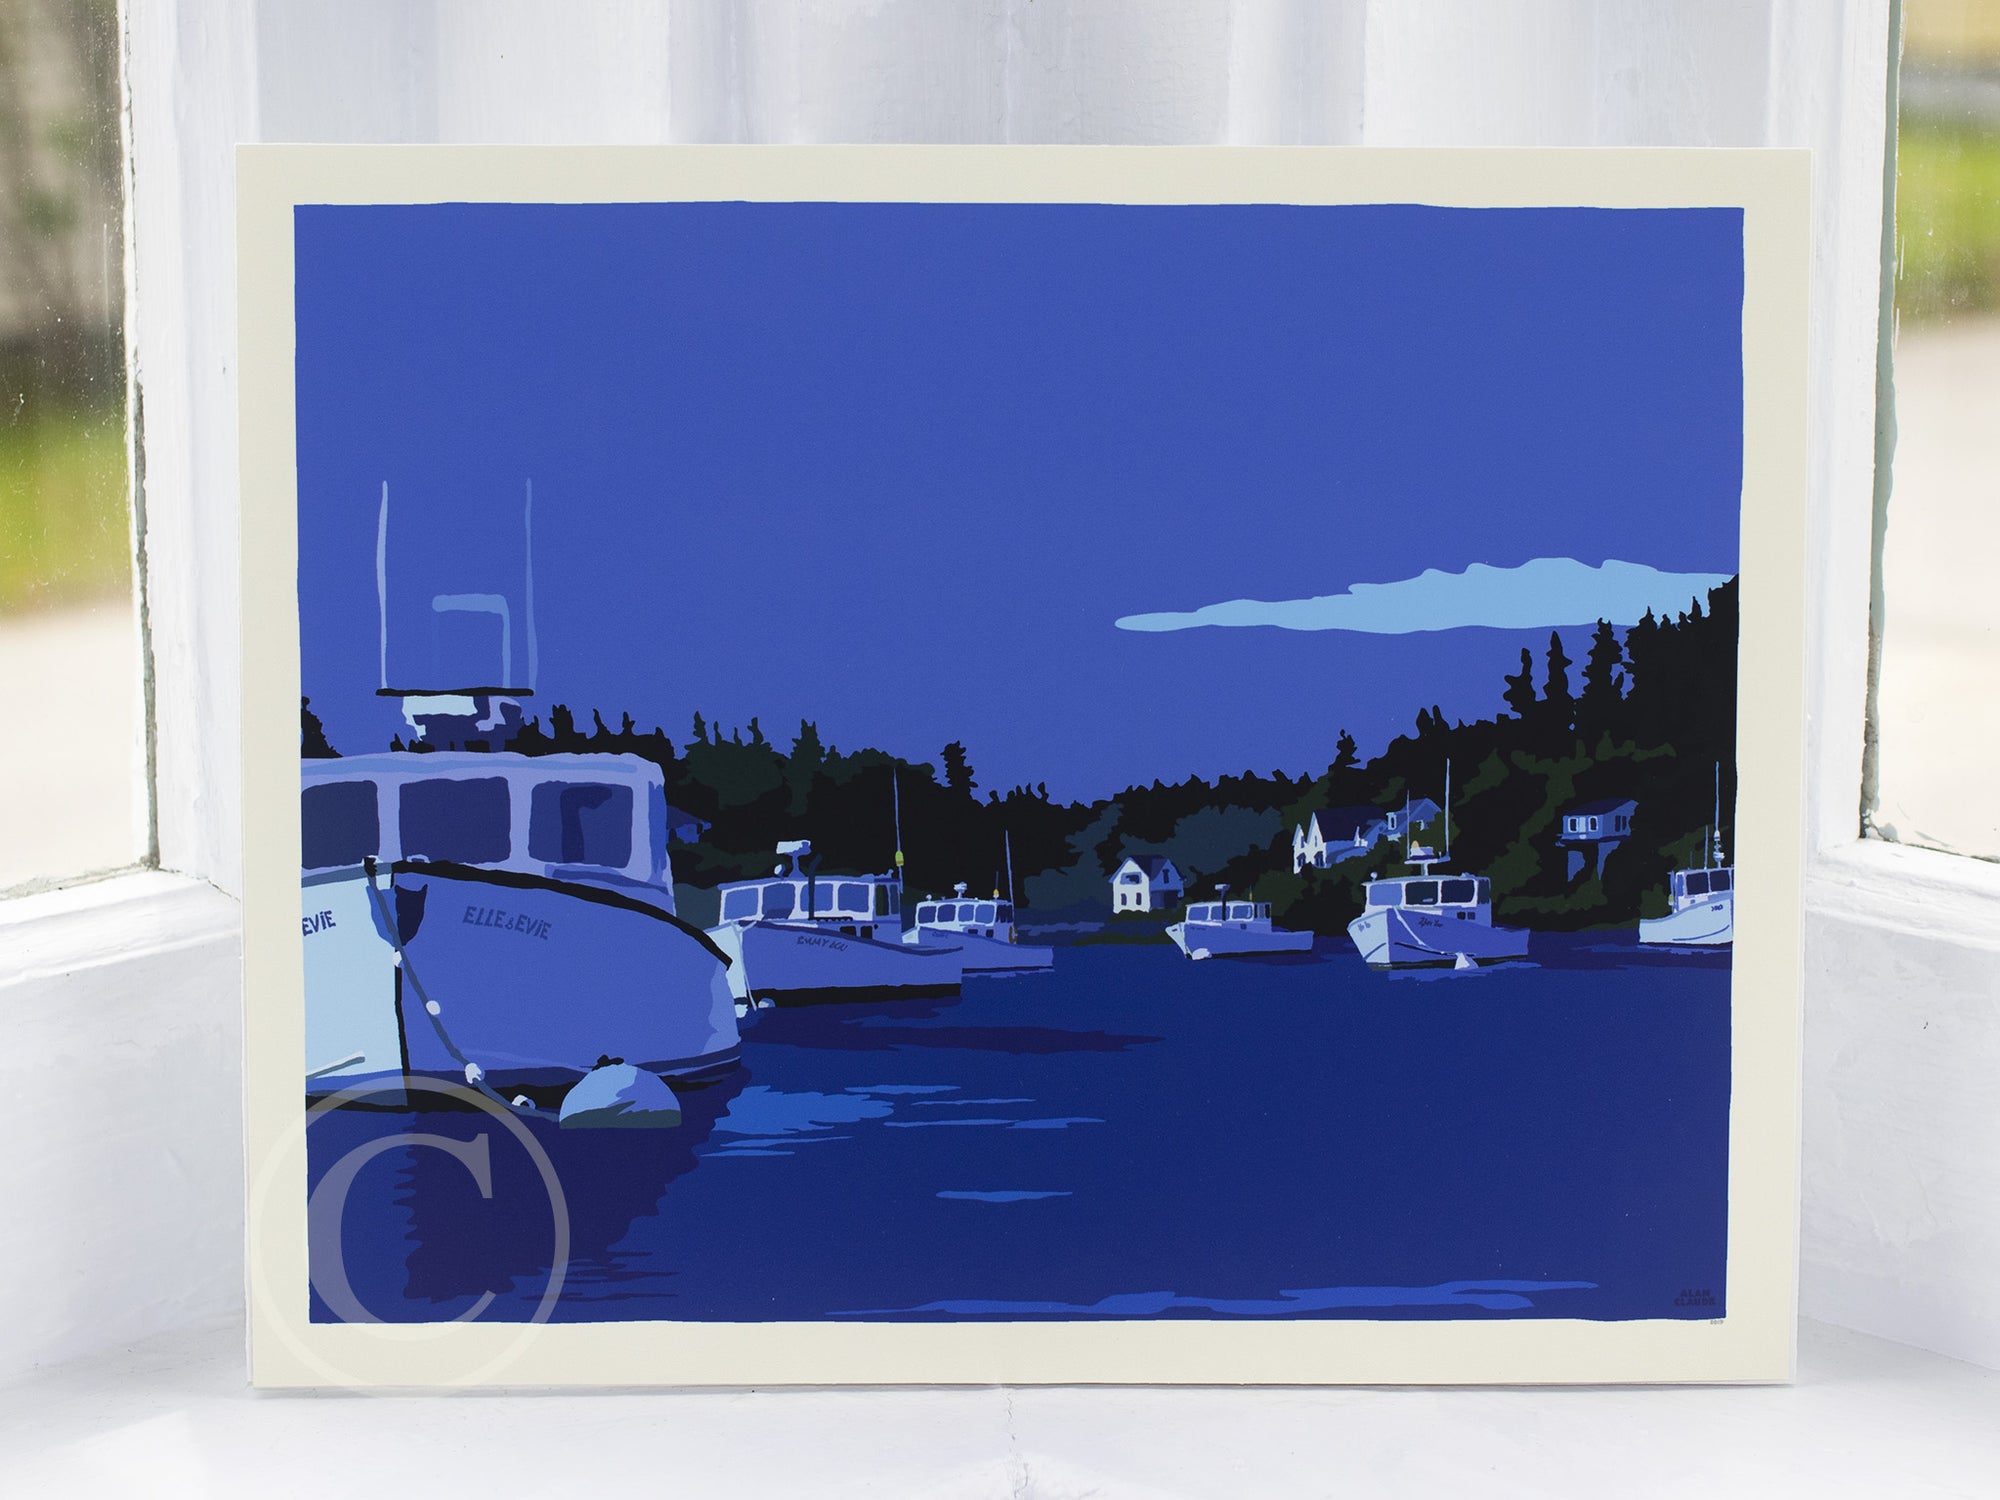 Moonlight Over Port Clyde Art Print 8" x 10" Wall Poster By Alan Claude - Maine